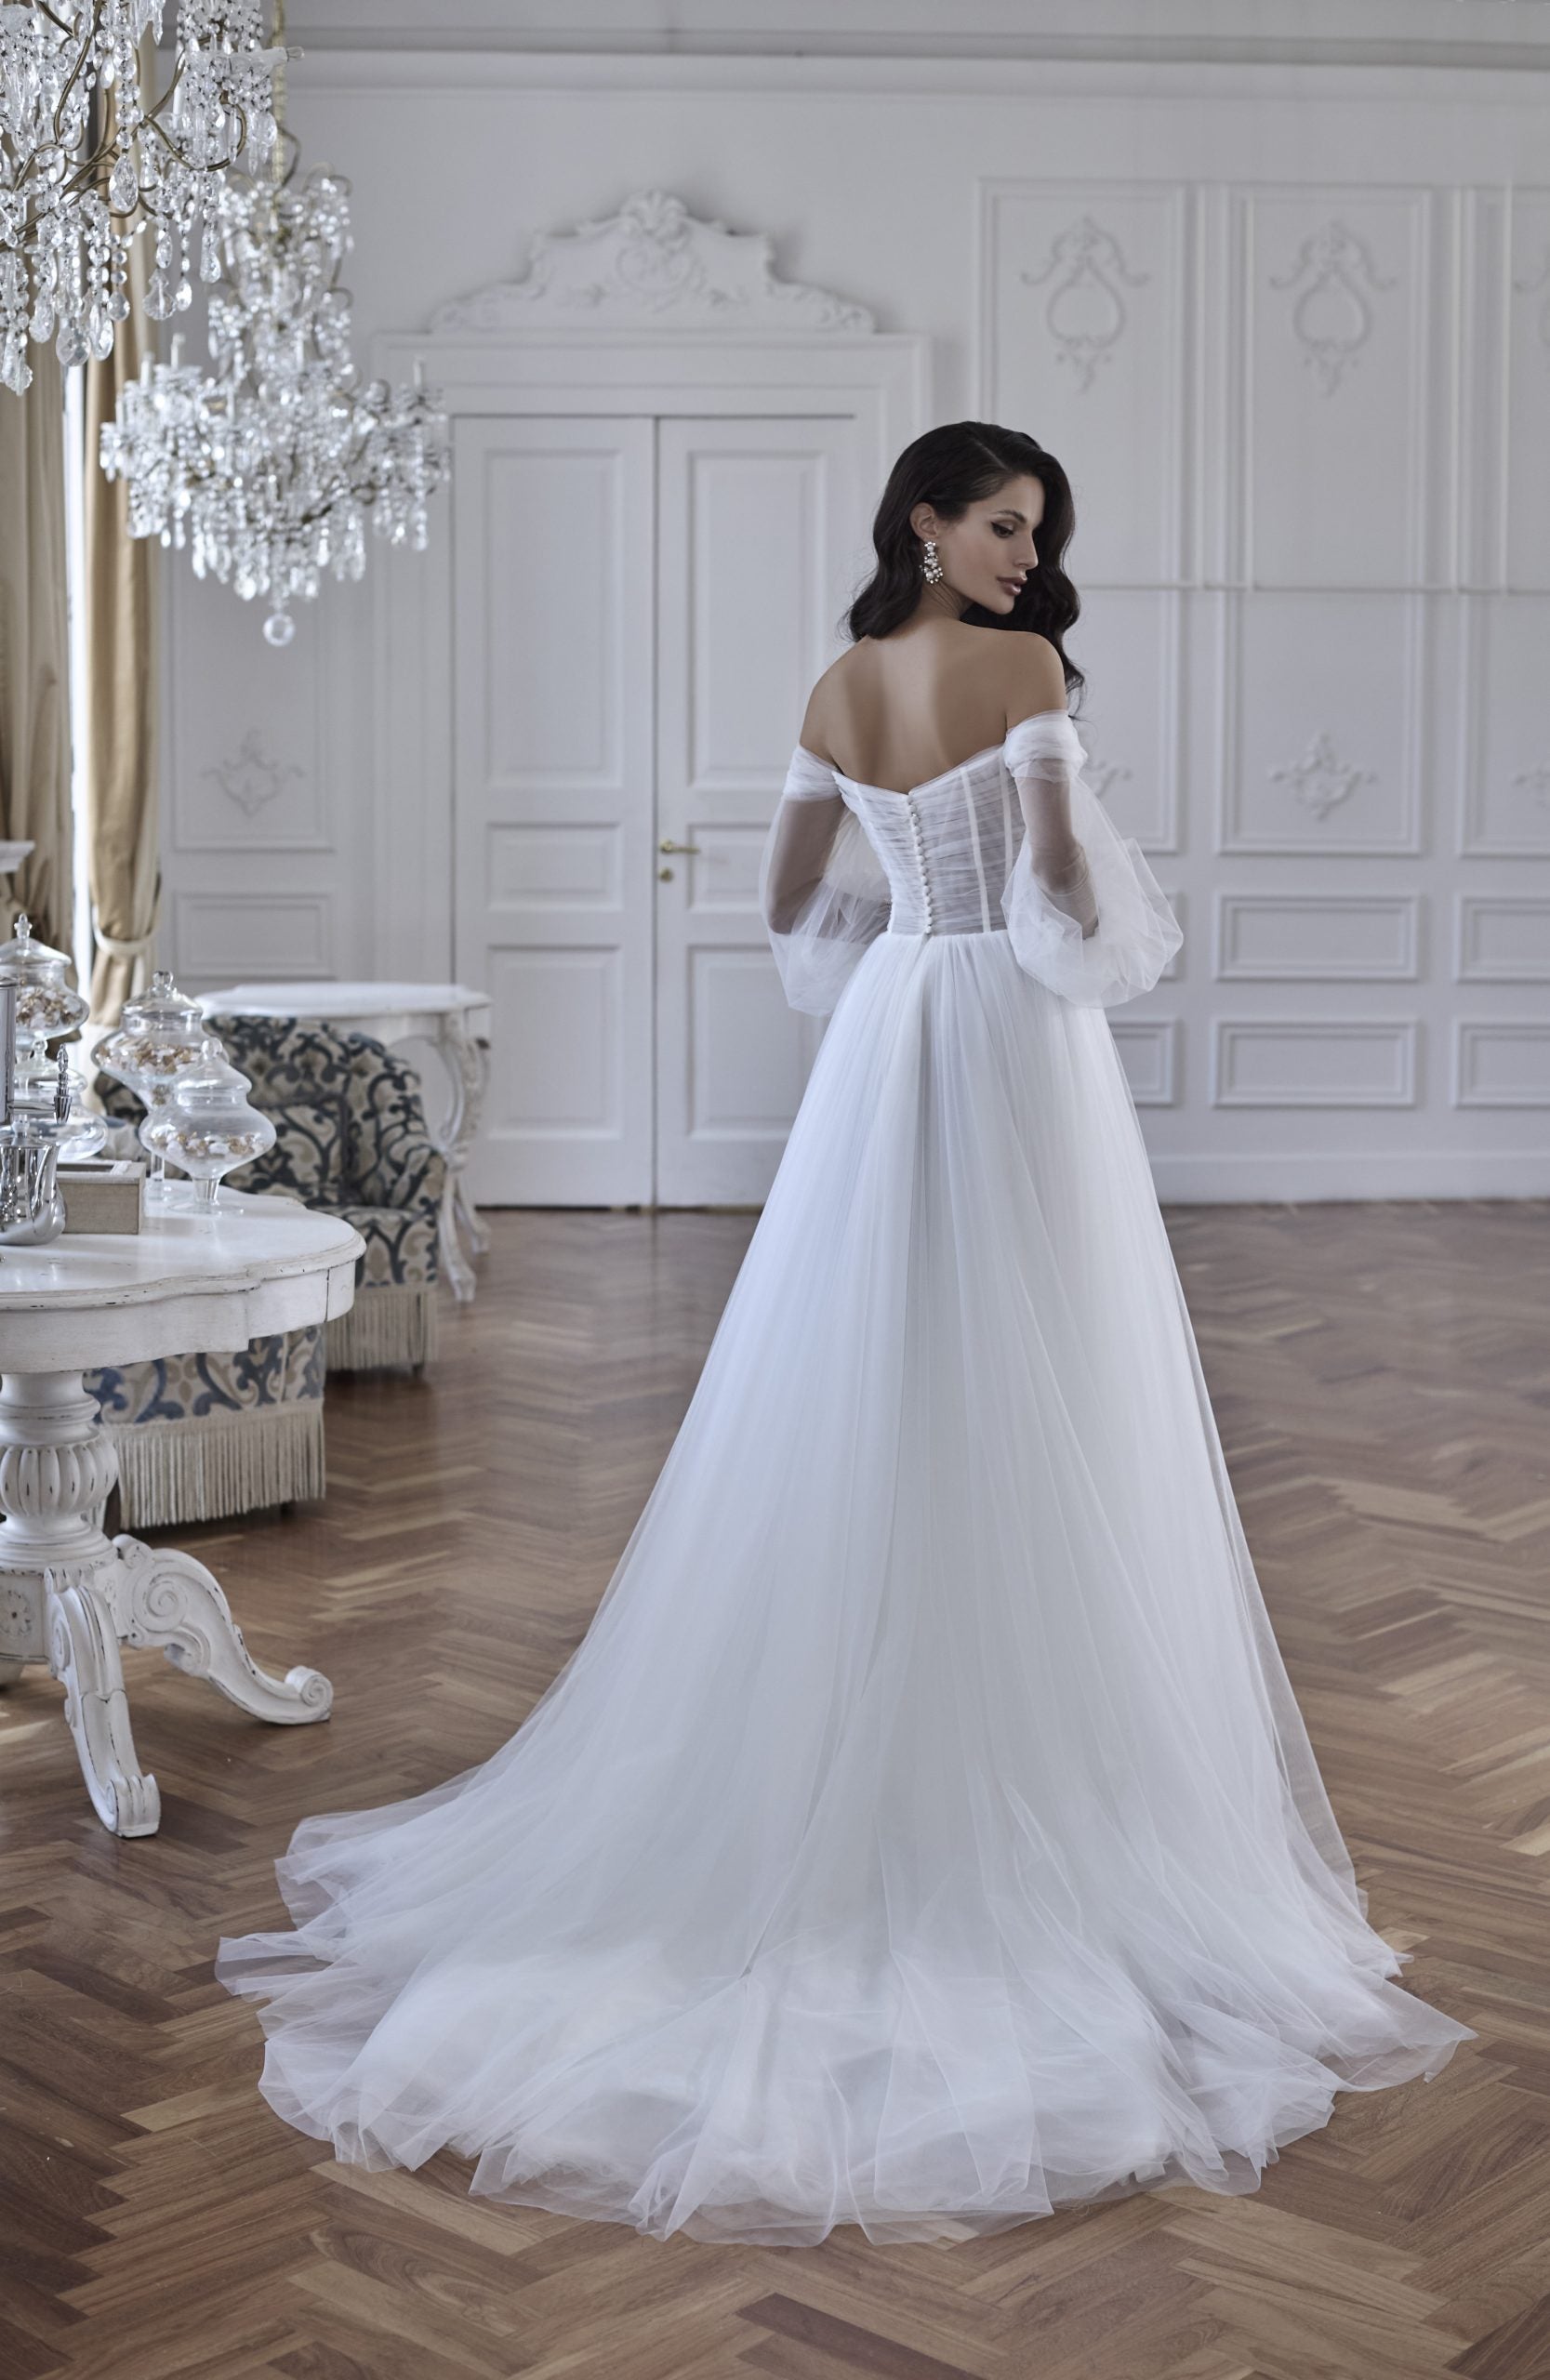 A-line Wedding Dress With Off The Shoulder Long Sleeves by Maison Signore - Image 2